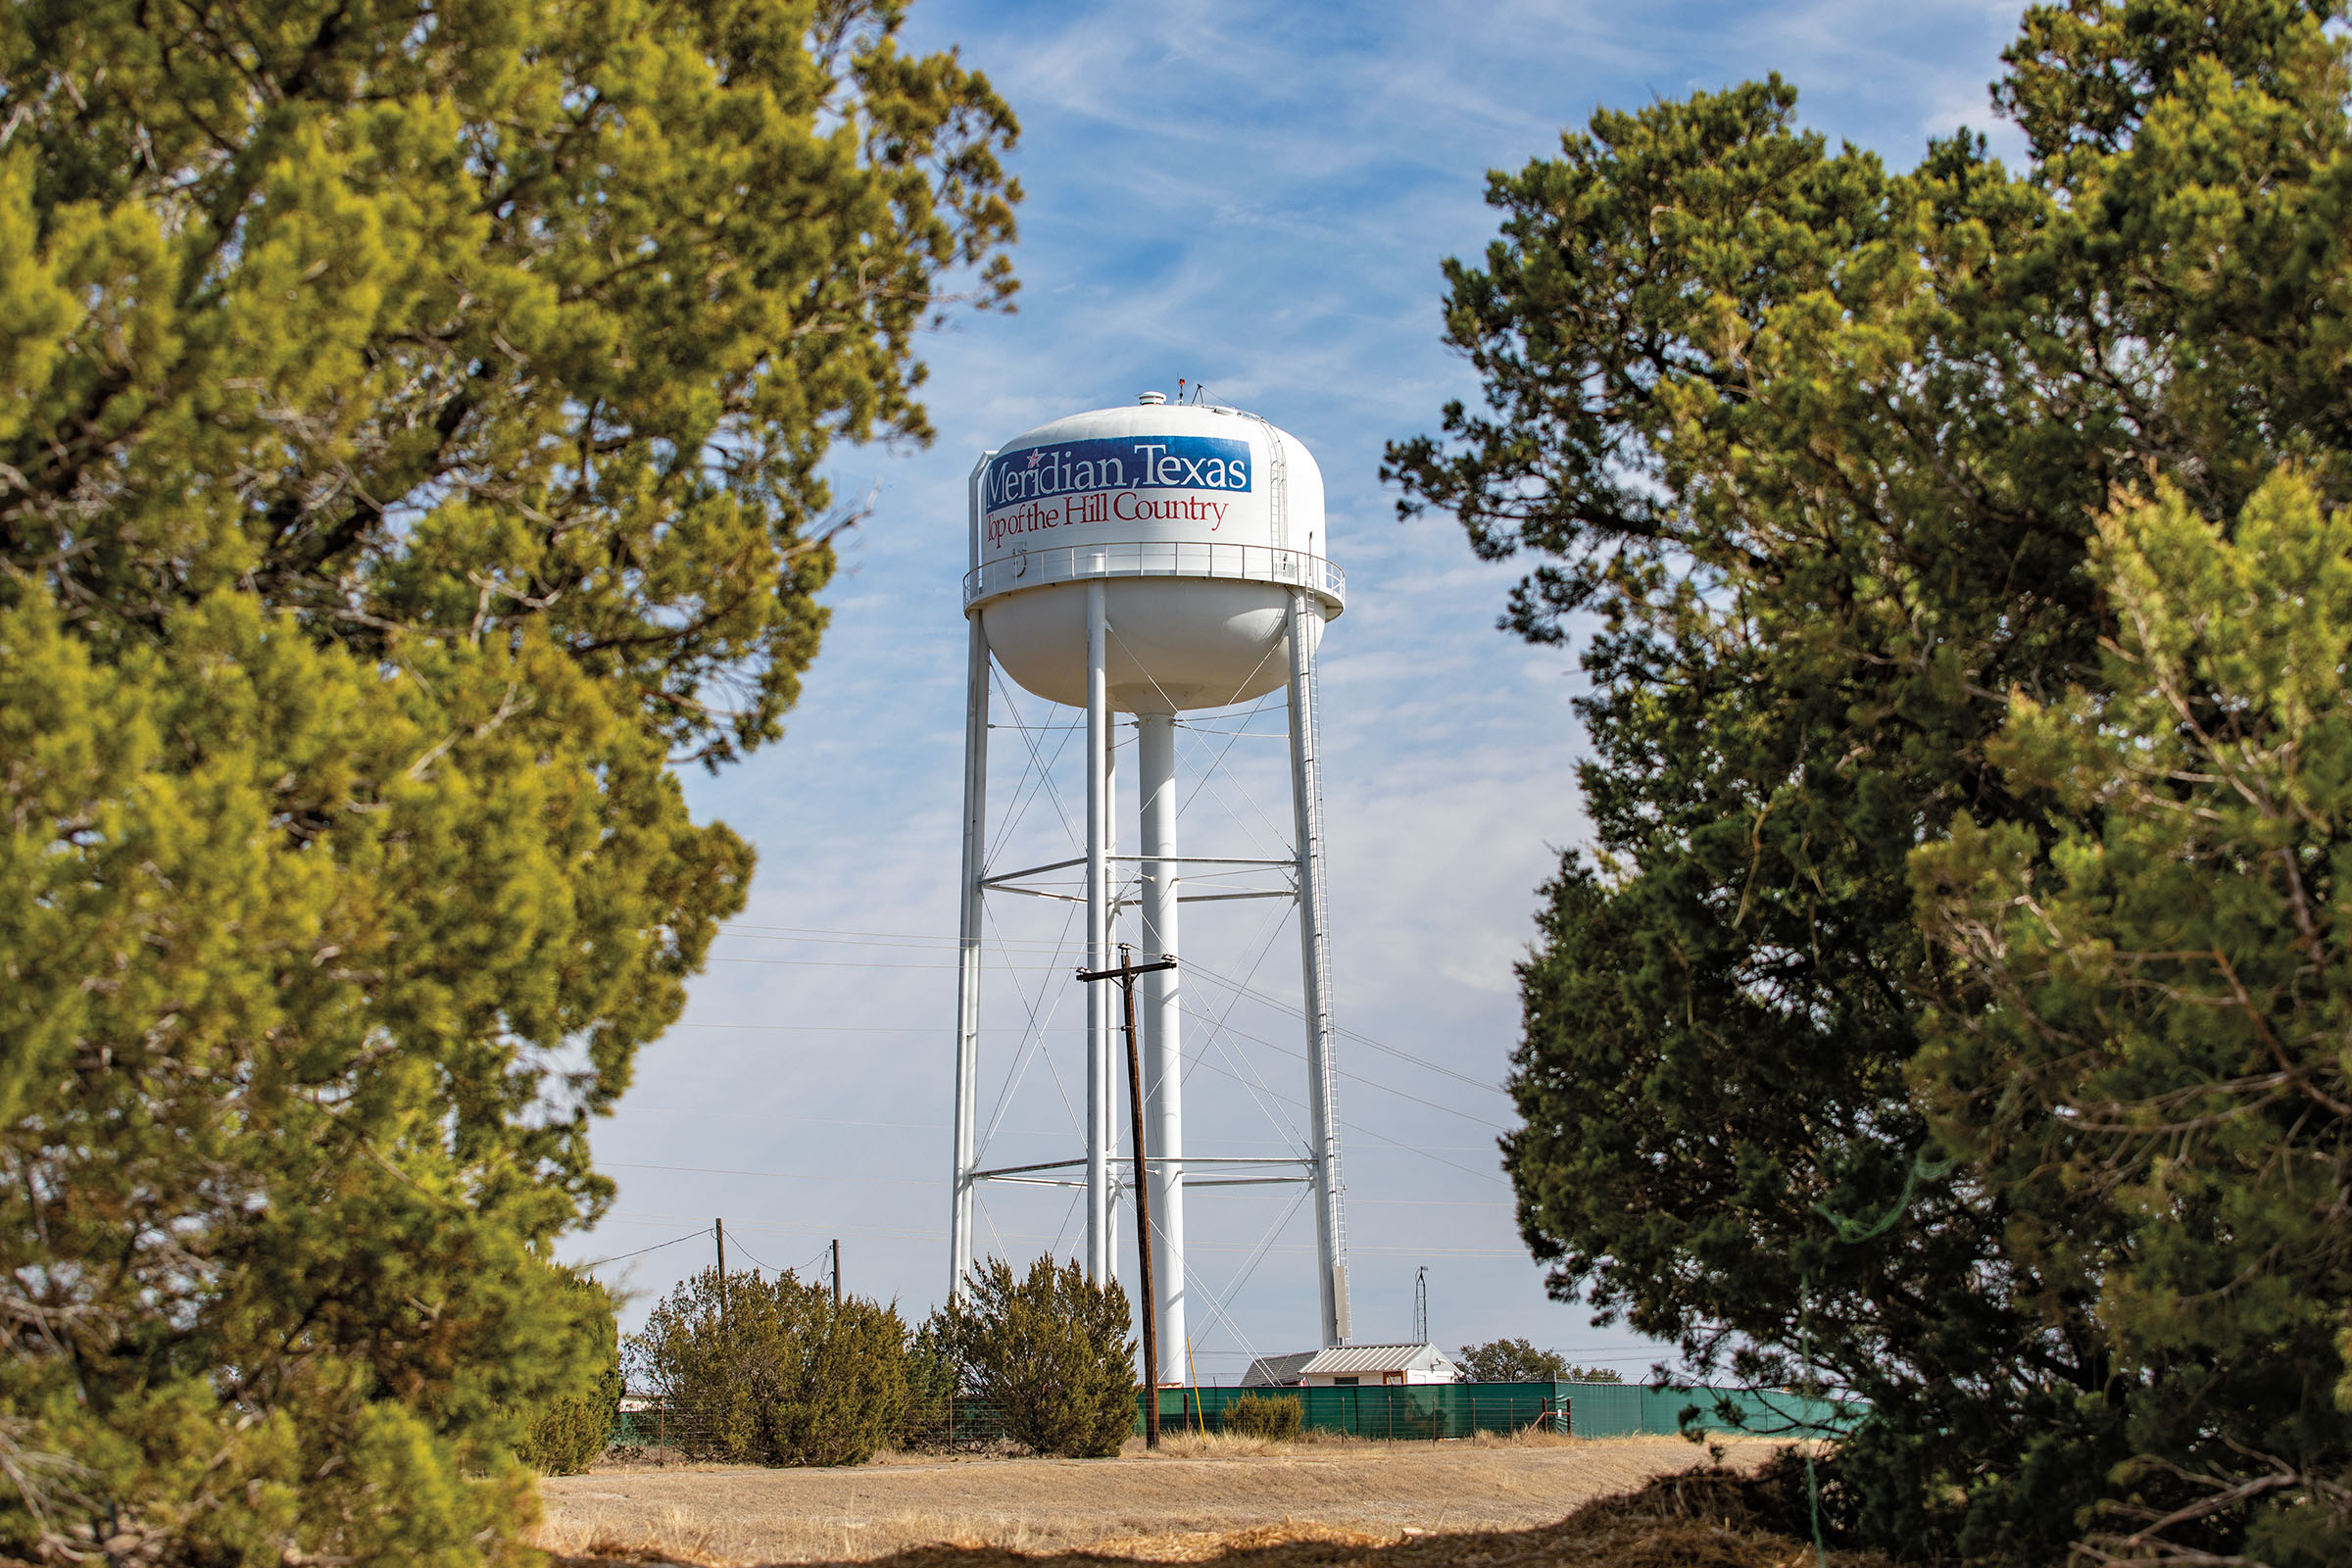 A tall white water tower reading "Meridian Texas: Top of the Hill Country"